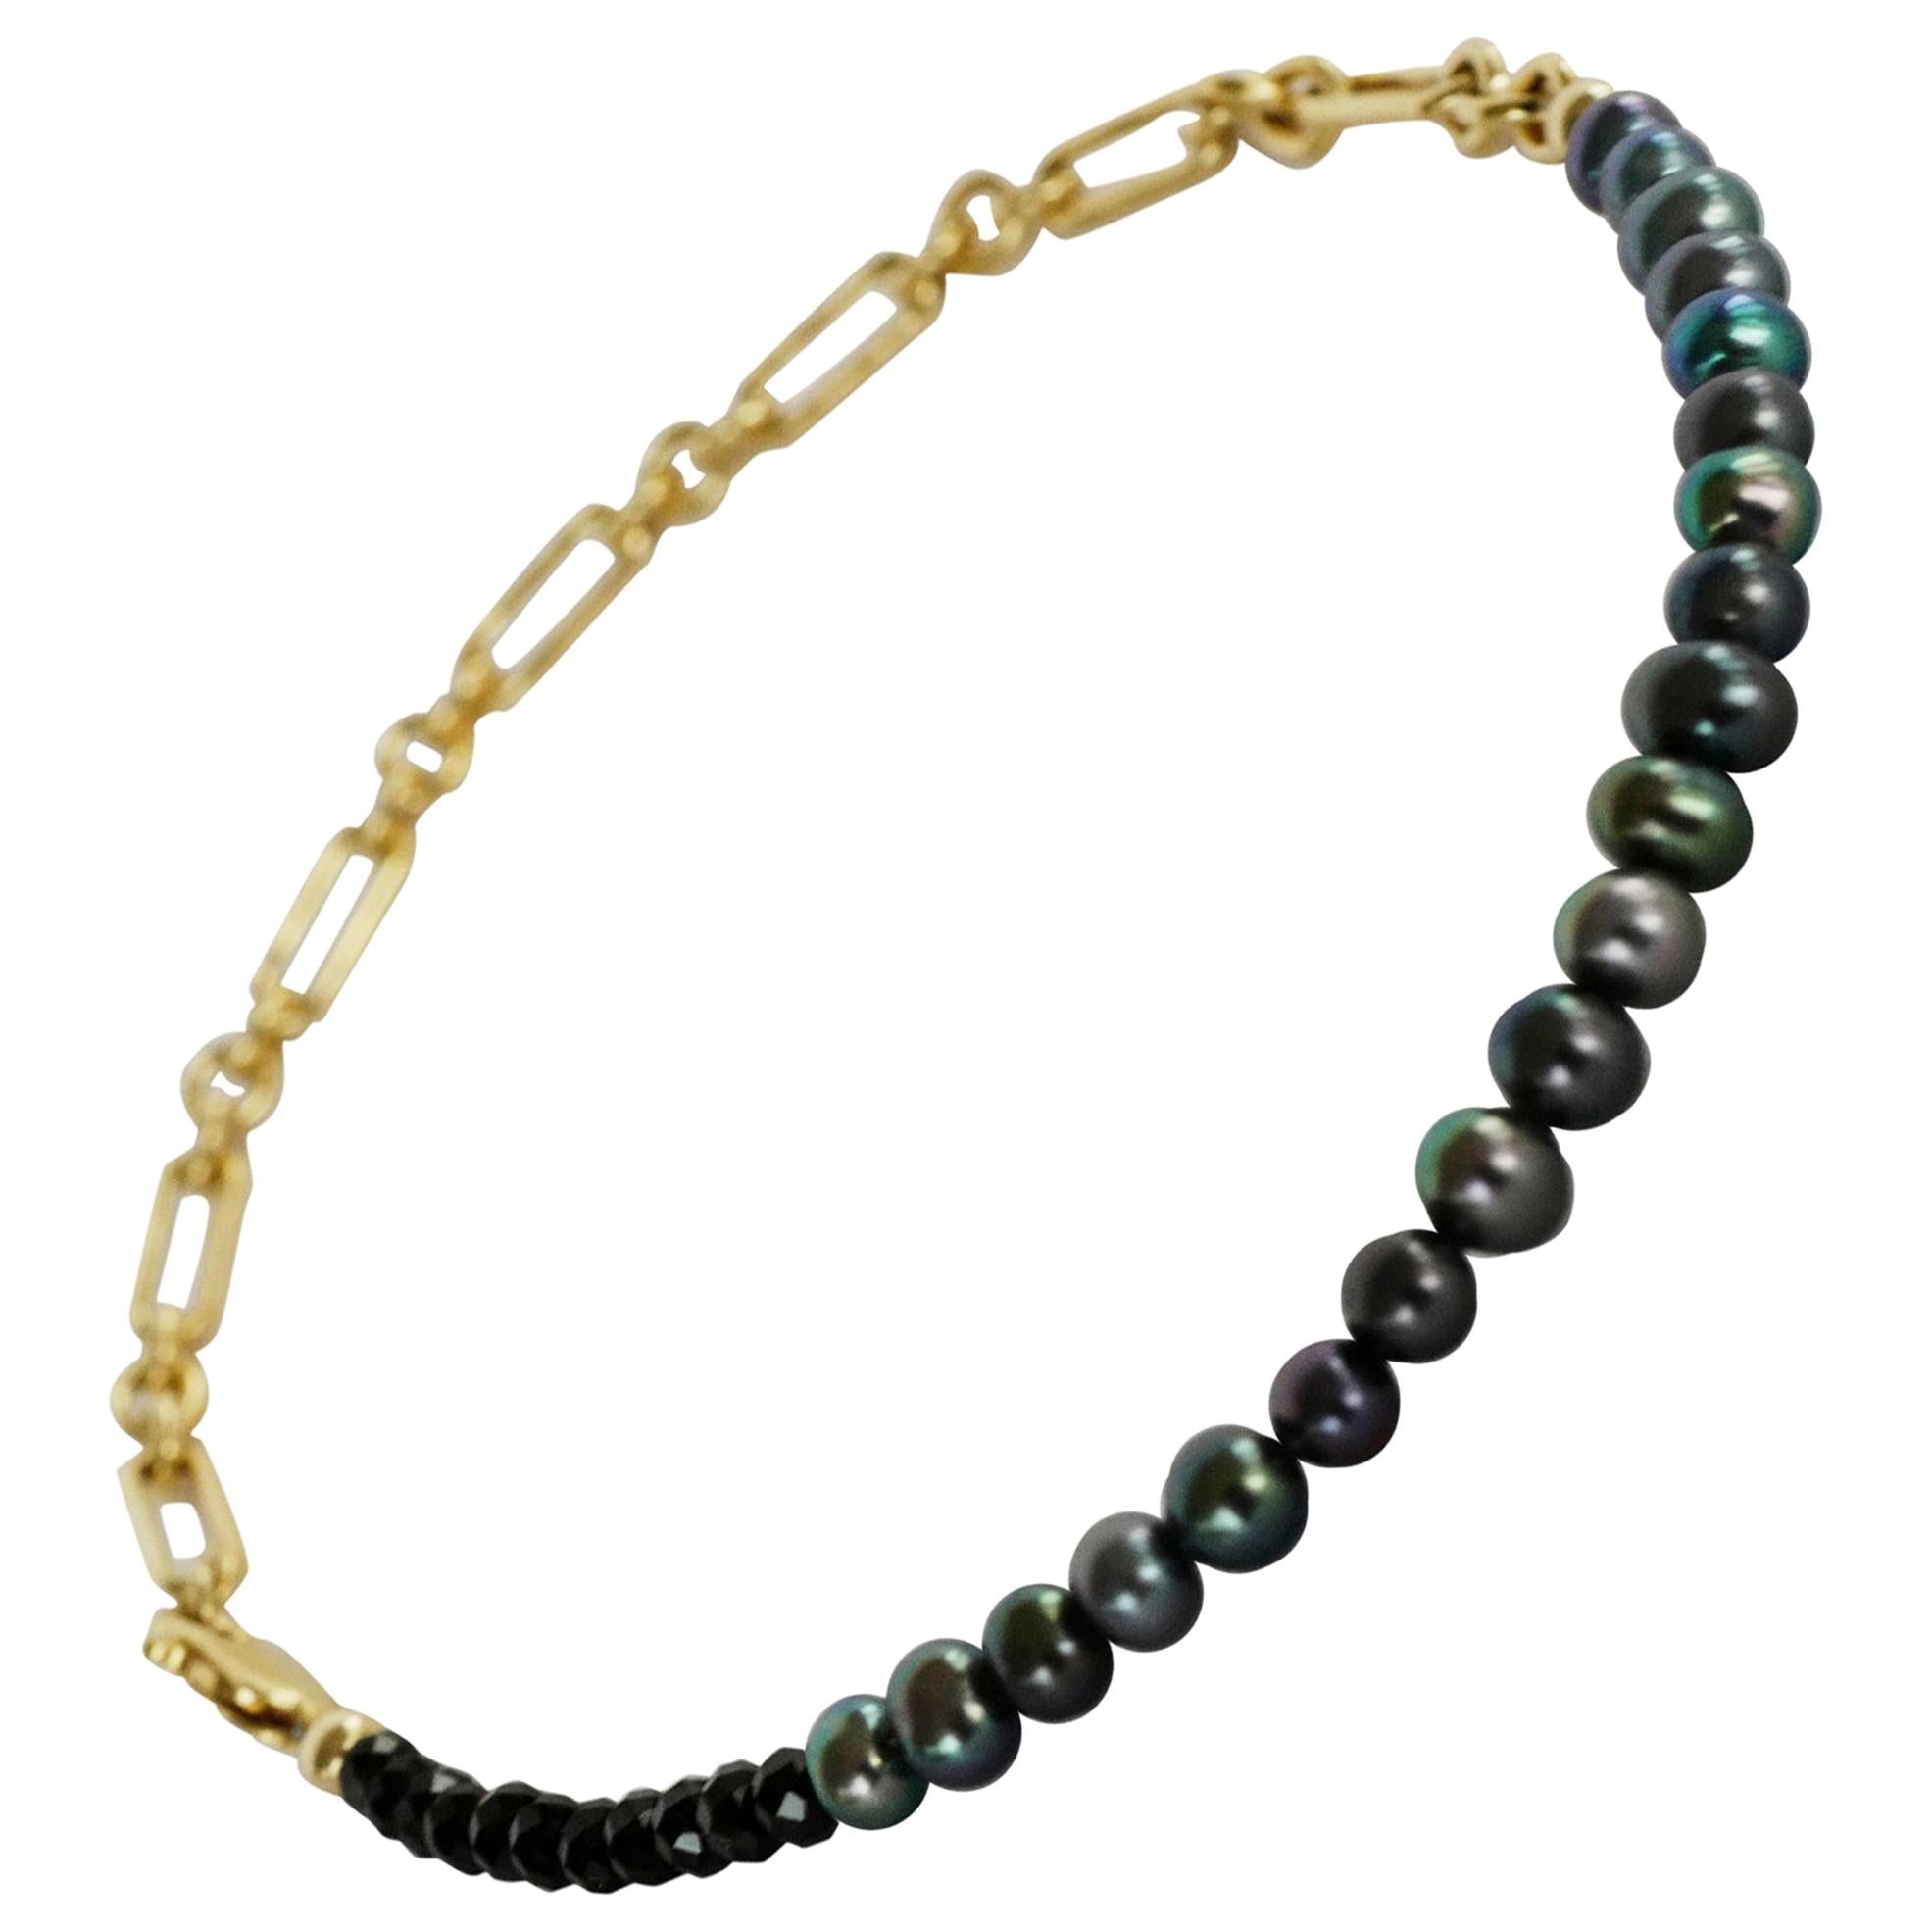 Ankle Bracelet Beaded Black Pearl Spinel Gold Filled Chain J Dauphin